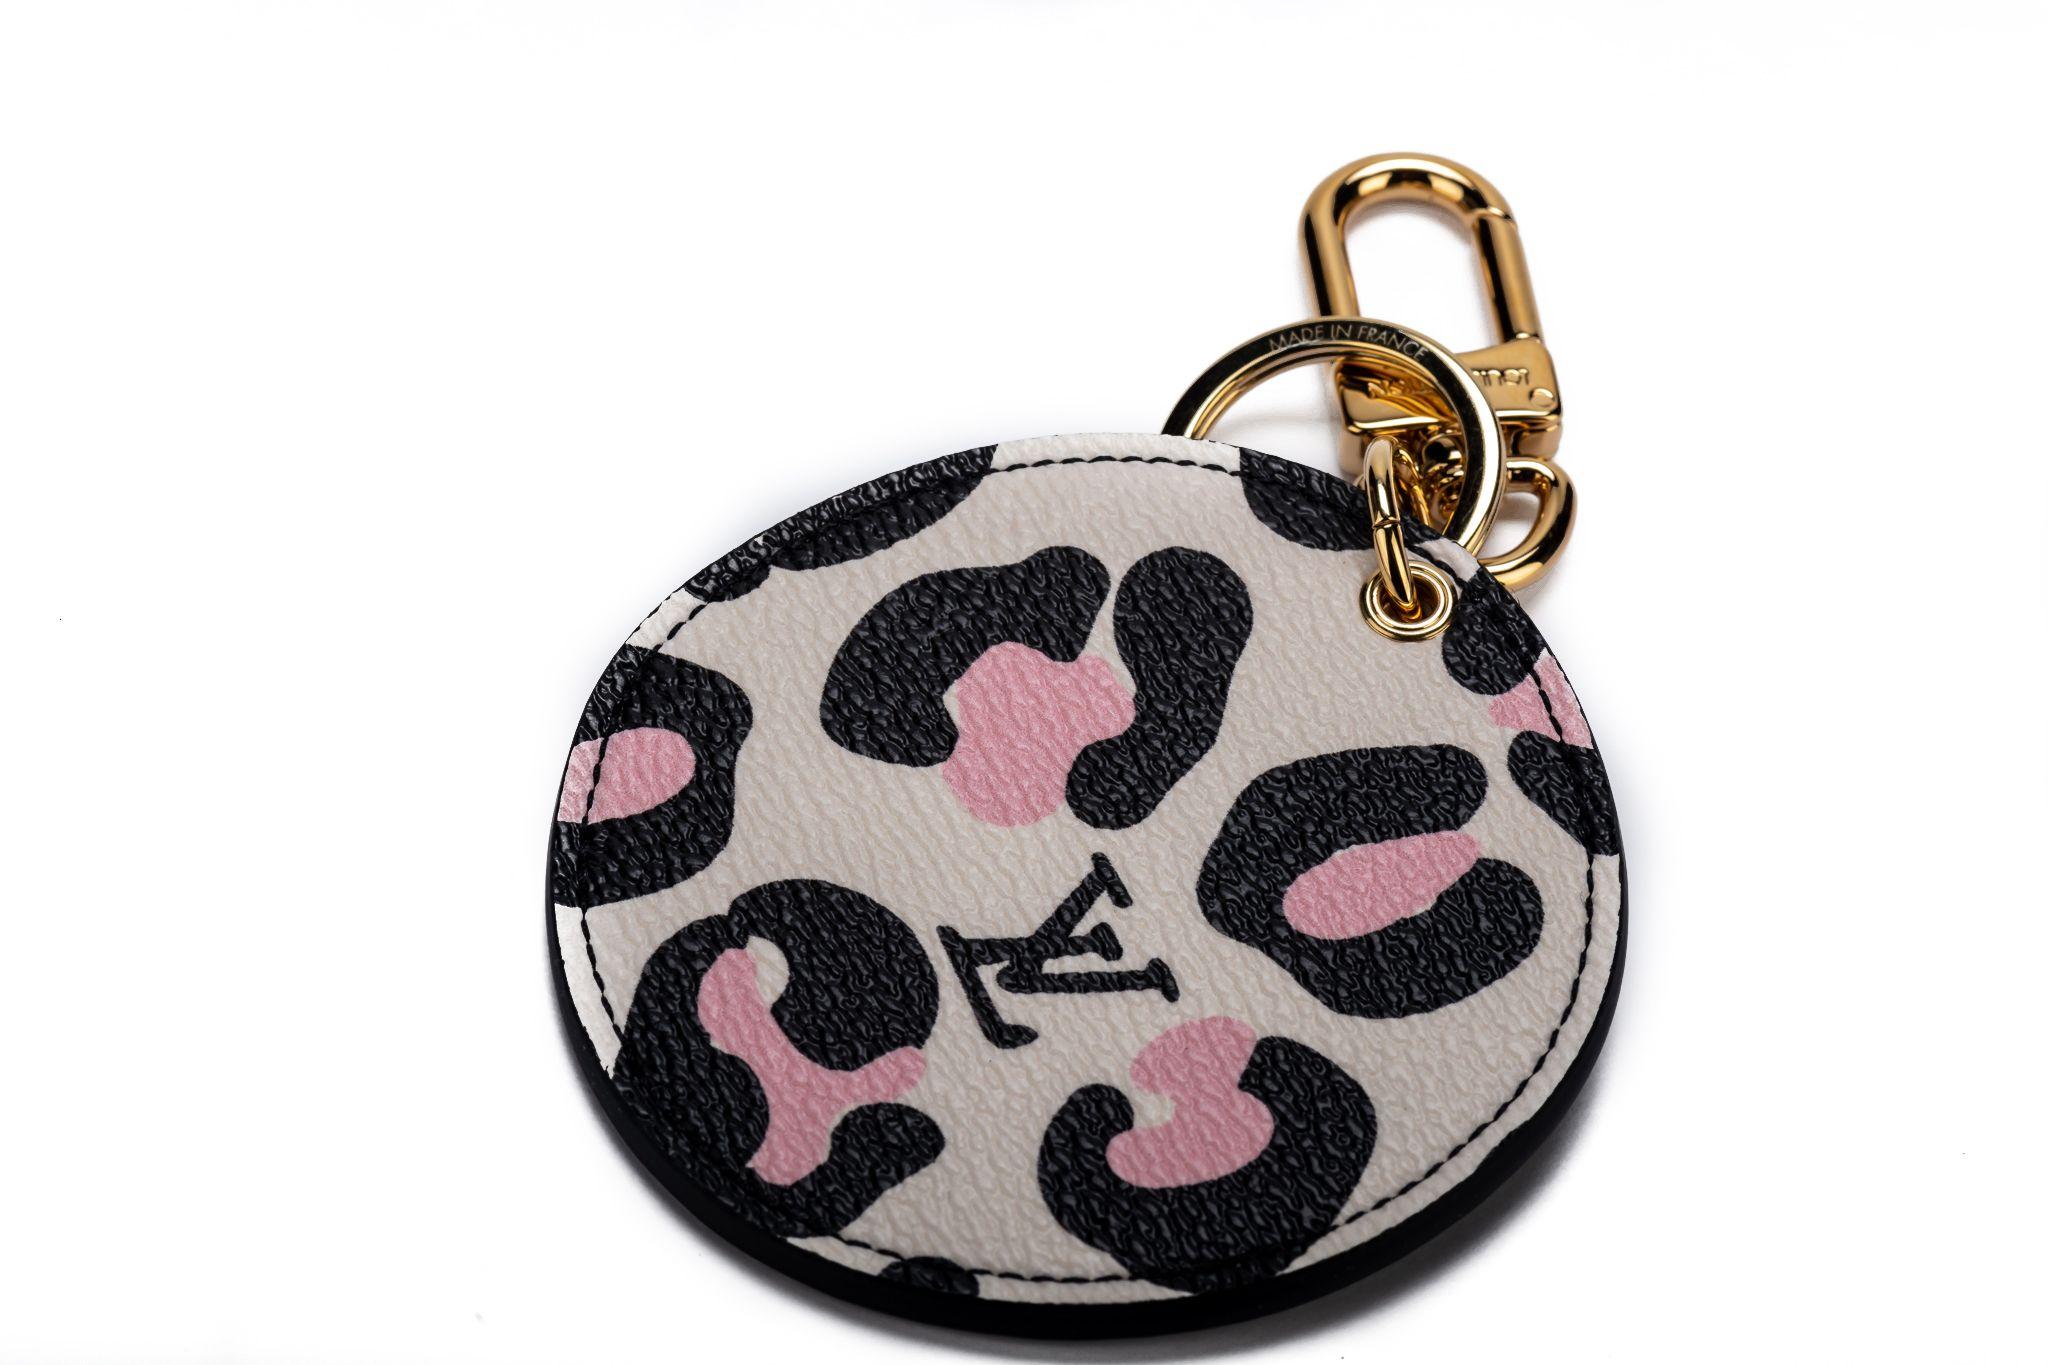 Louis Vuitton Wild At Heart Wallet - 2 For Sale on 1stDibs